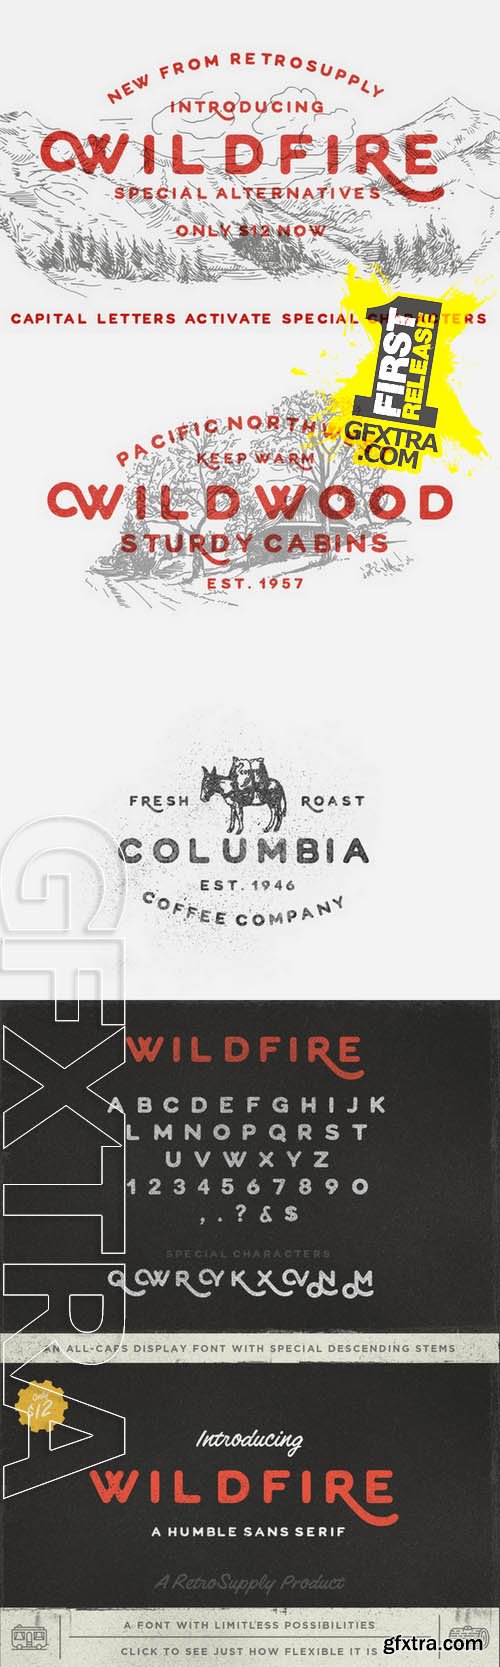 WildFire Font - CM 154097